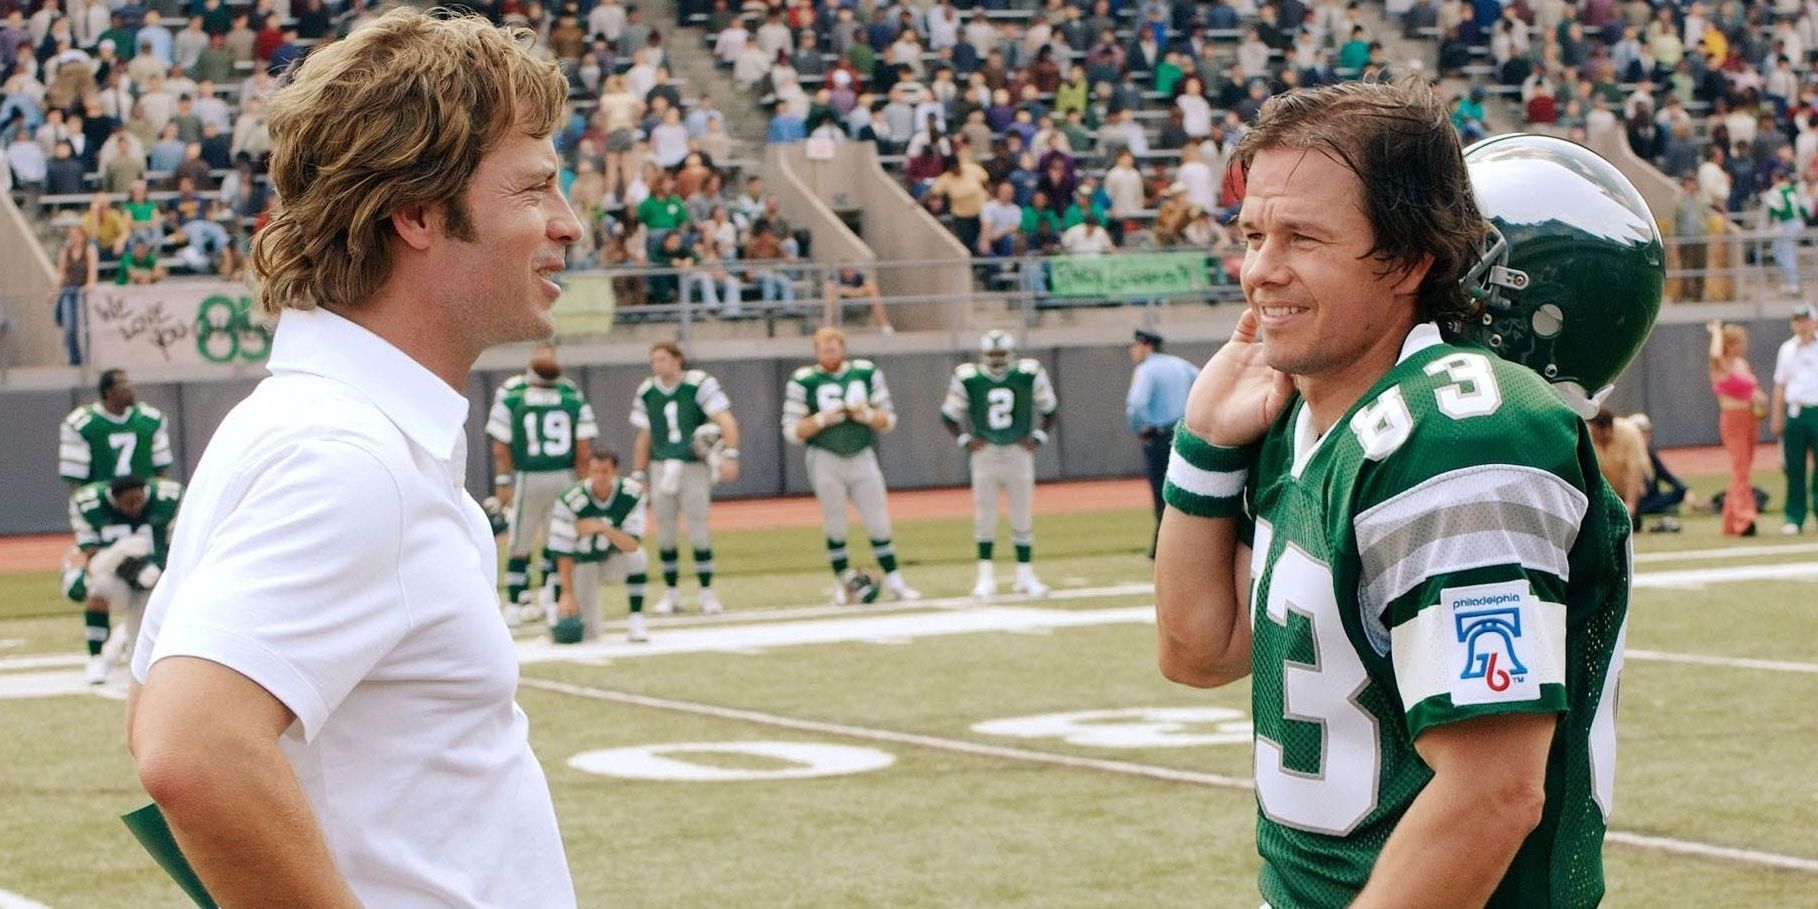 10 Best Disney Sports Movies Ranked (According To Rotten Tomatoes)